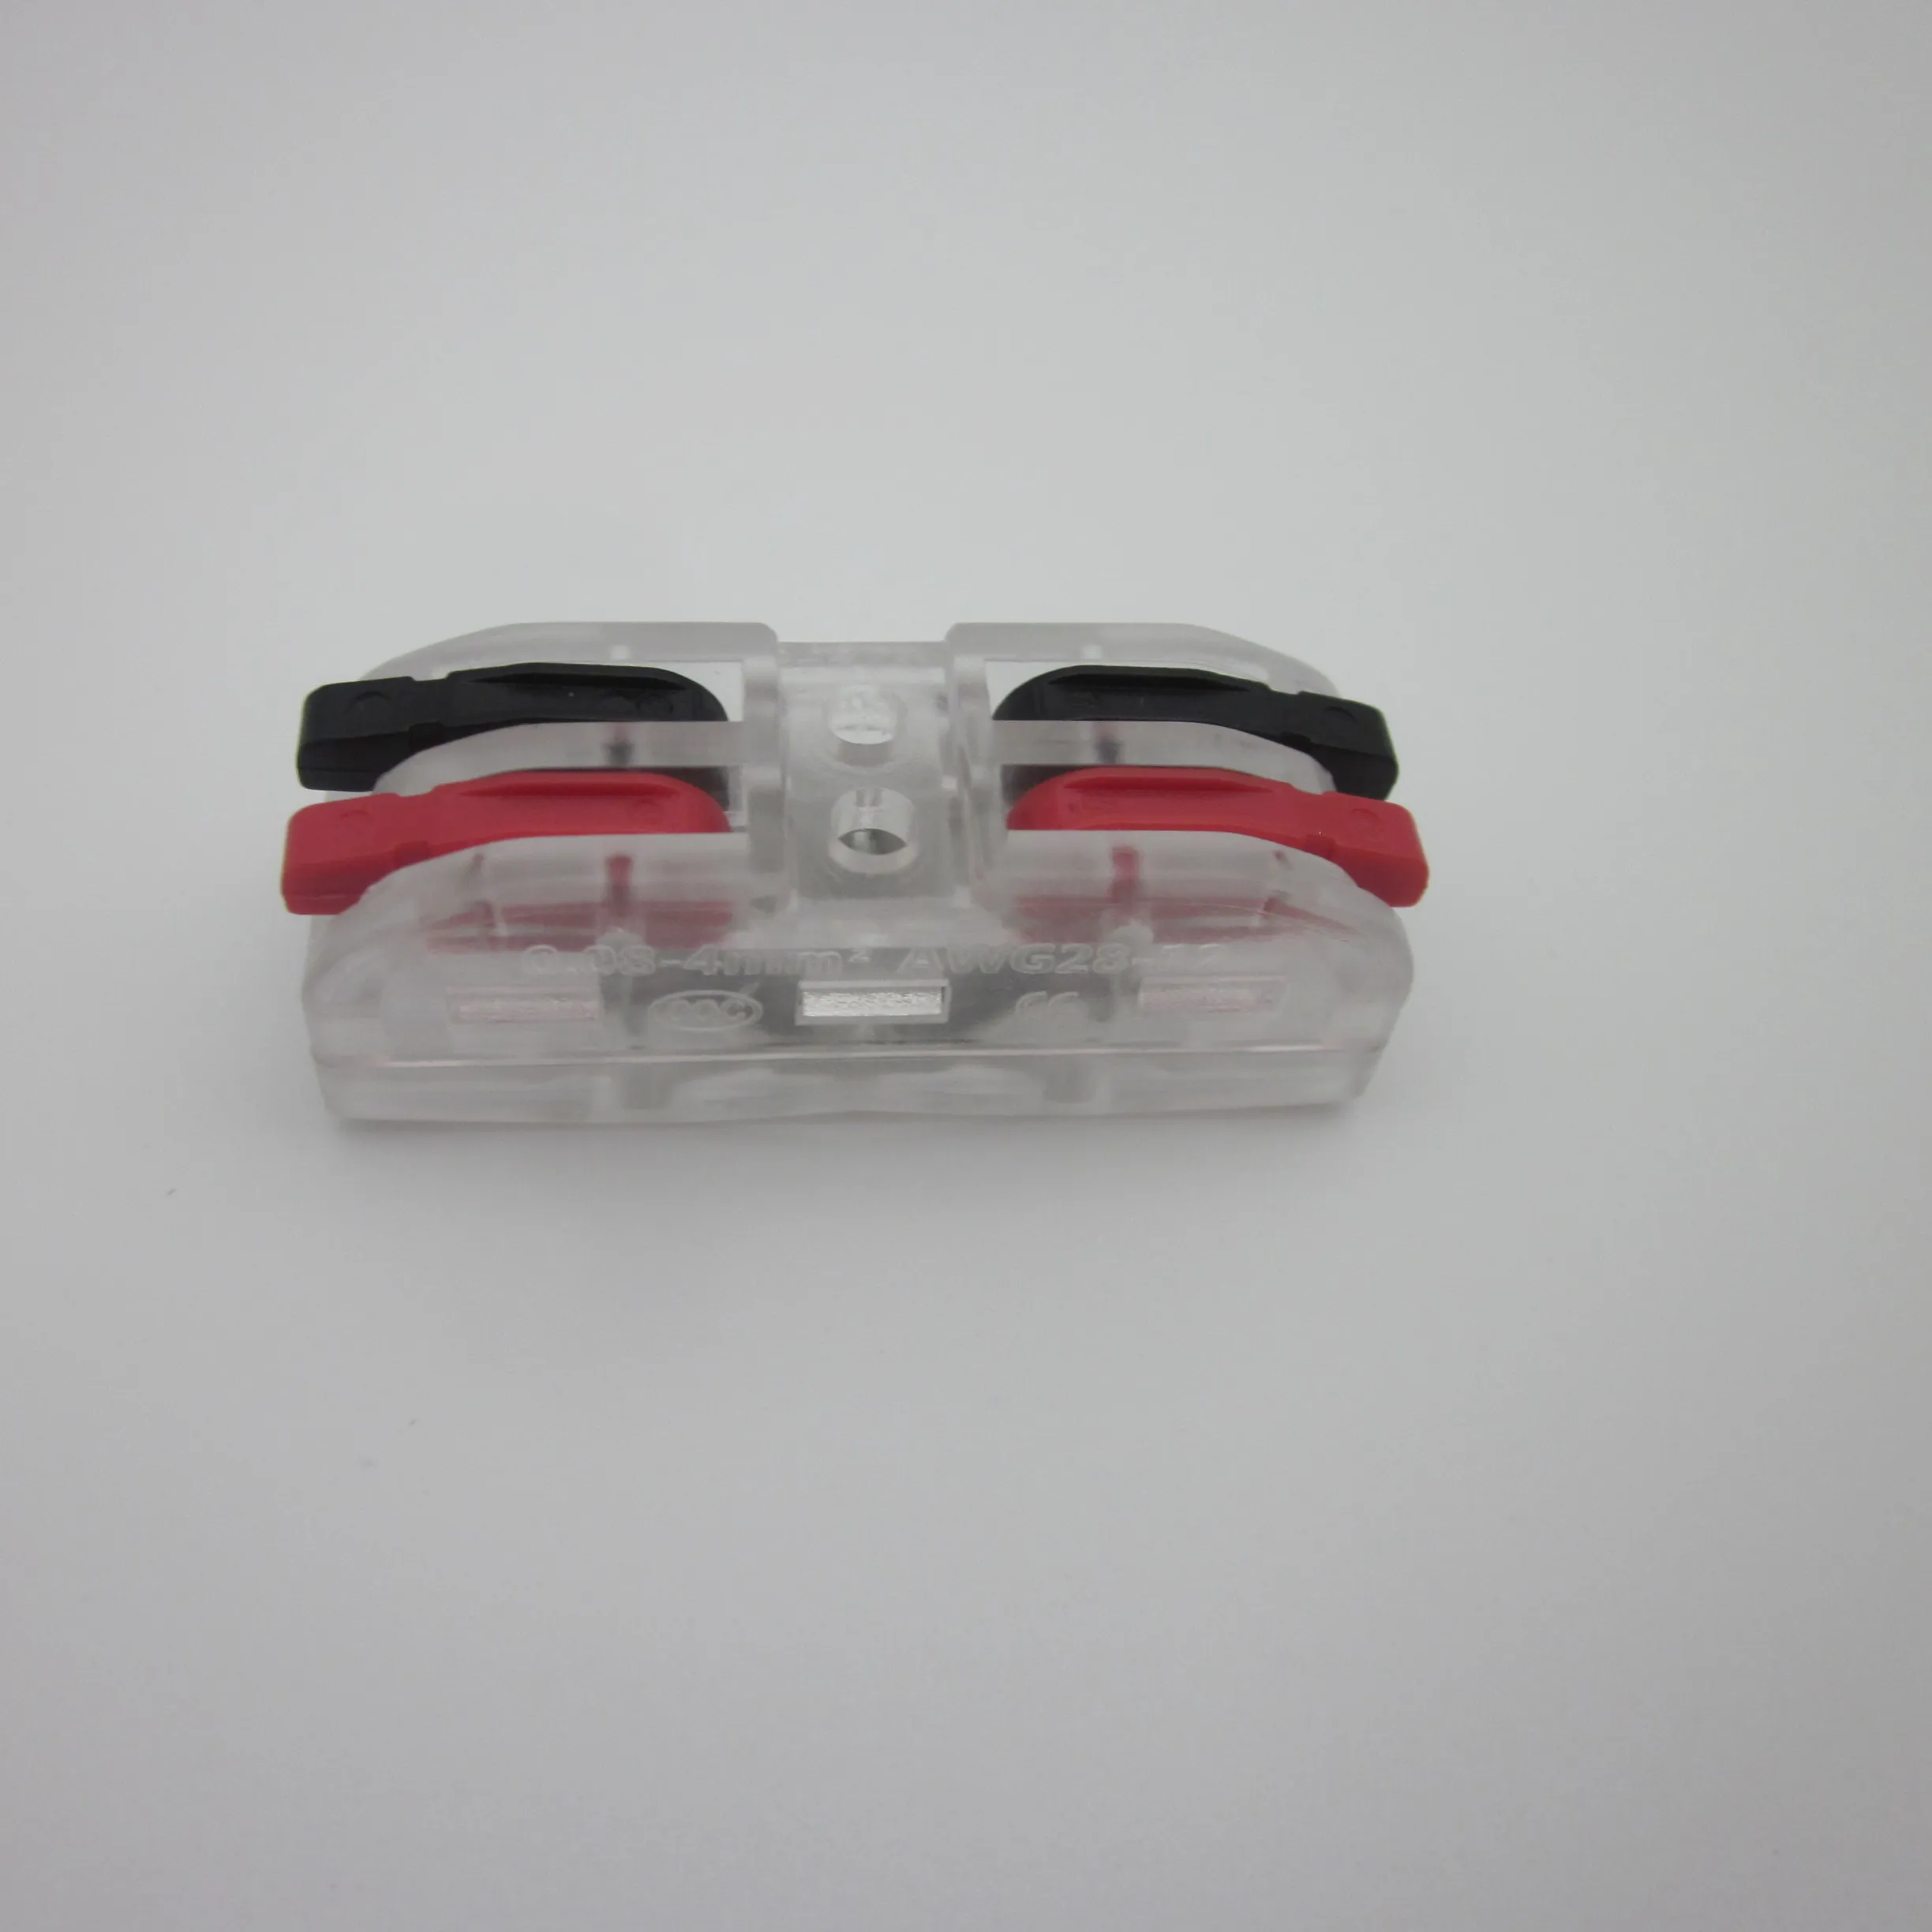 SPL2 Origin China CE Certification PC Material Transparent Color 2 Conductor L N red black Lever Terminal Block Wire Connector